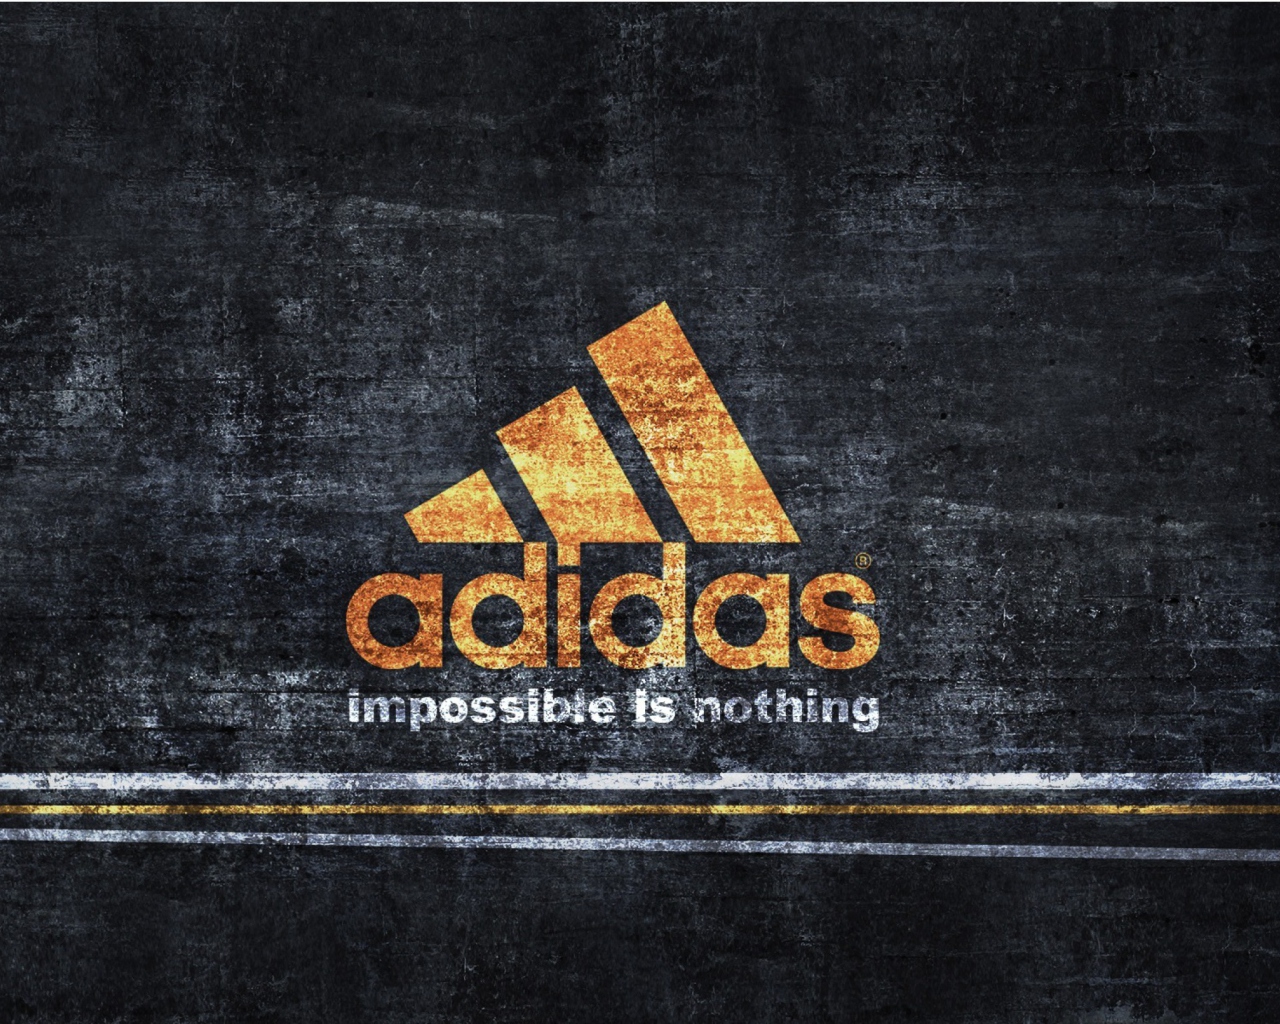 Adidas – Impossible is Nothing screenshot #1 1280x1024